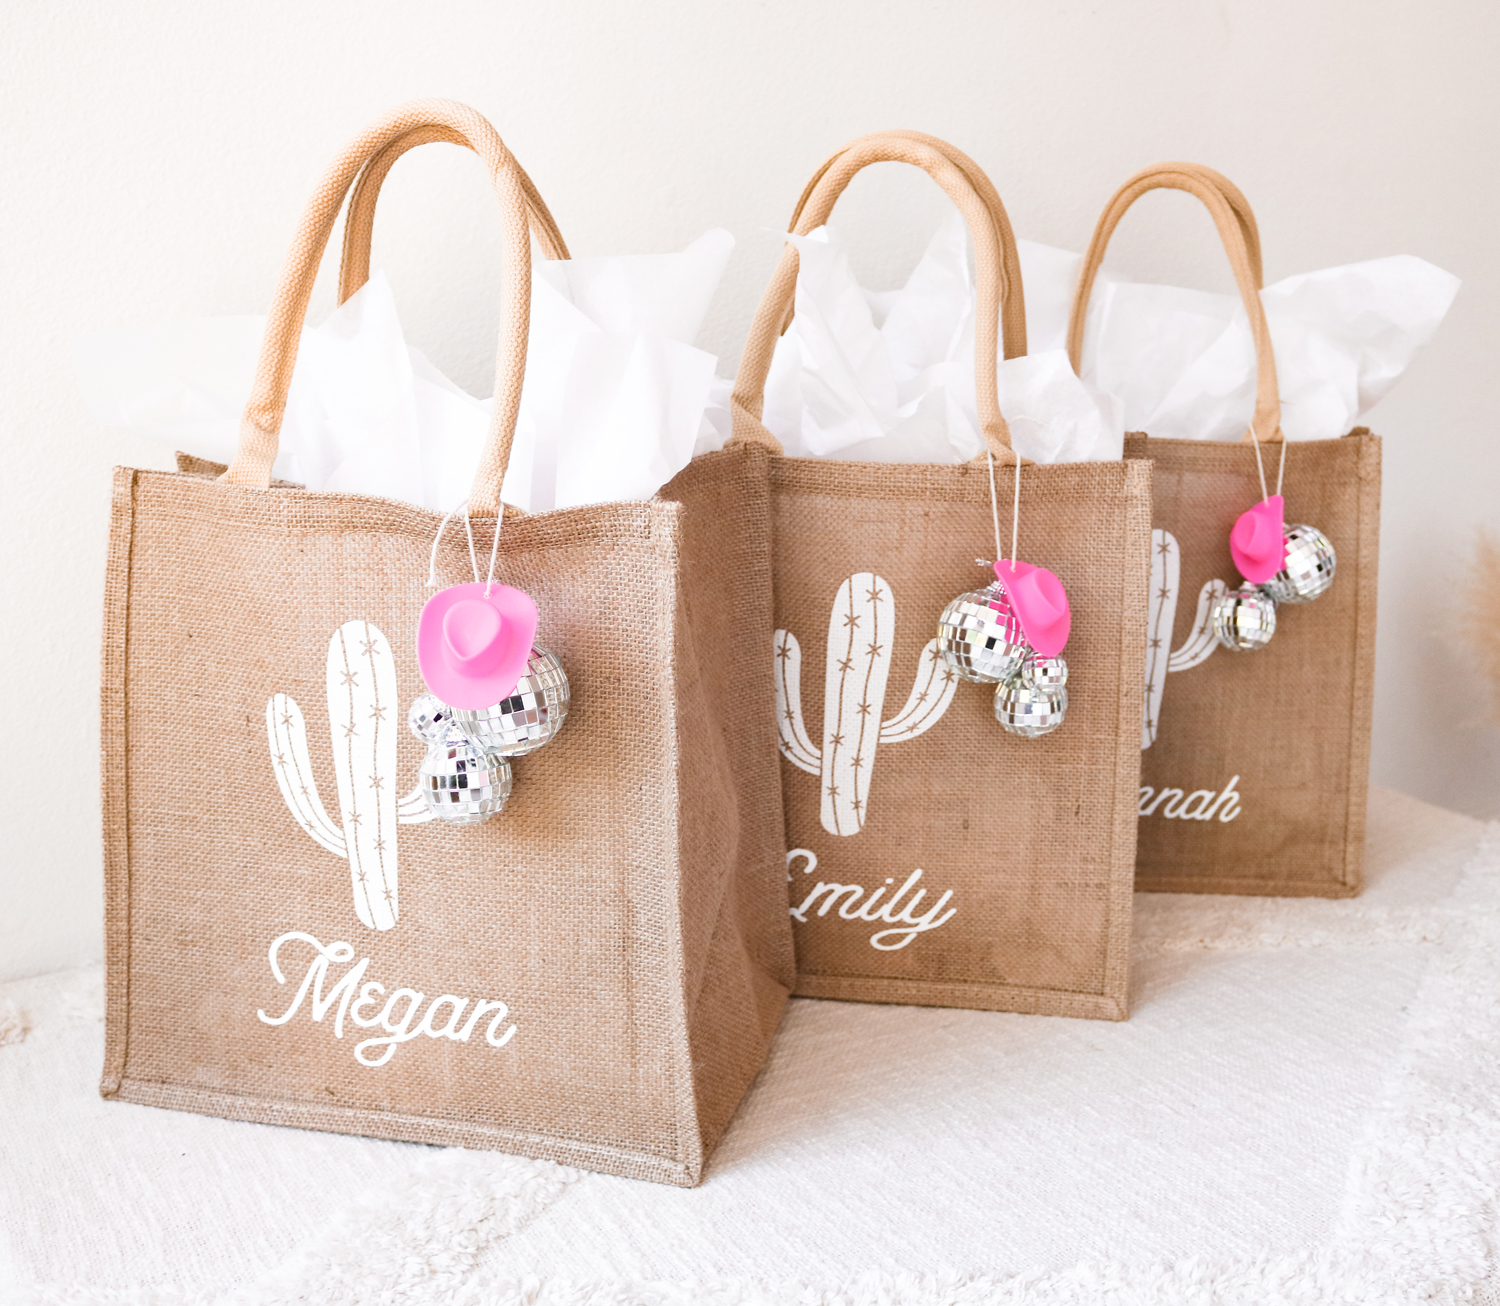 Bachelorette Party Tote Bags | Personalized Tote Bag | Fiesta Siesta T -  ilulily designs